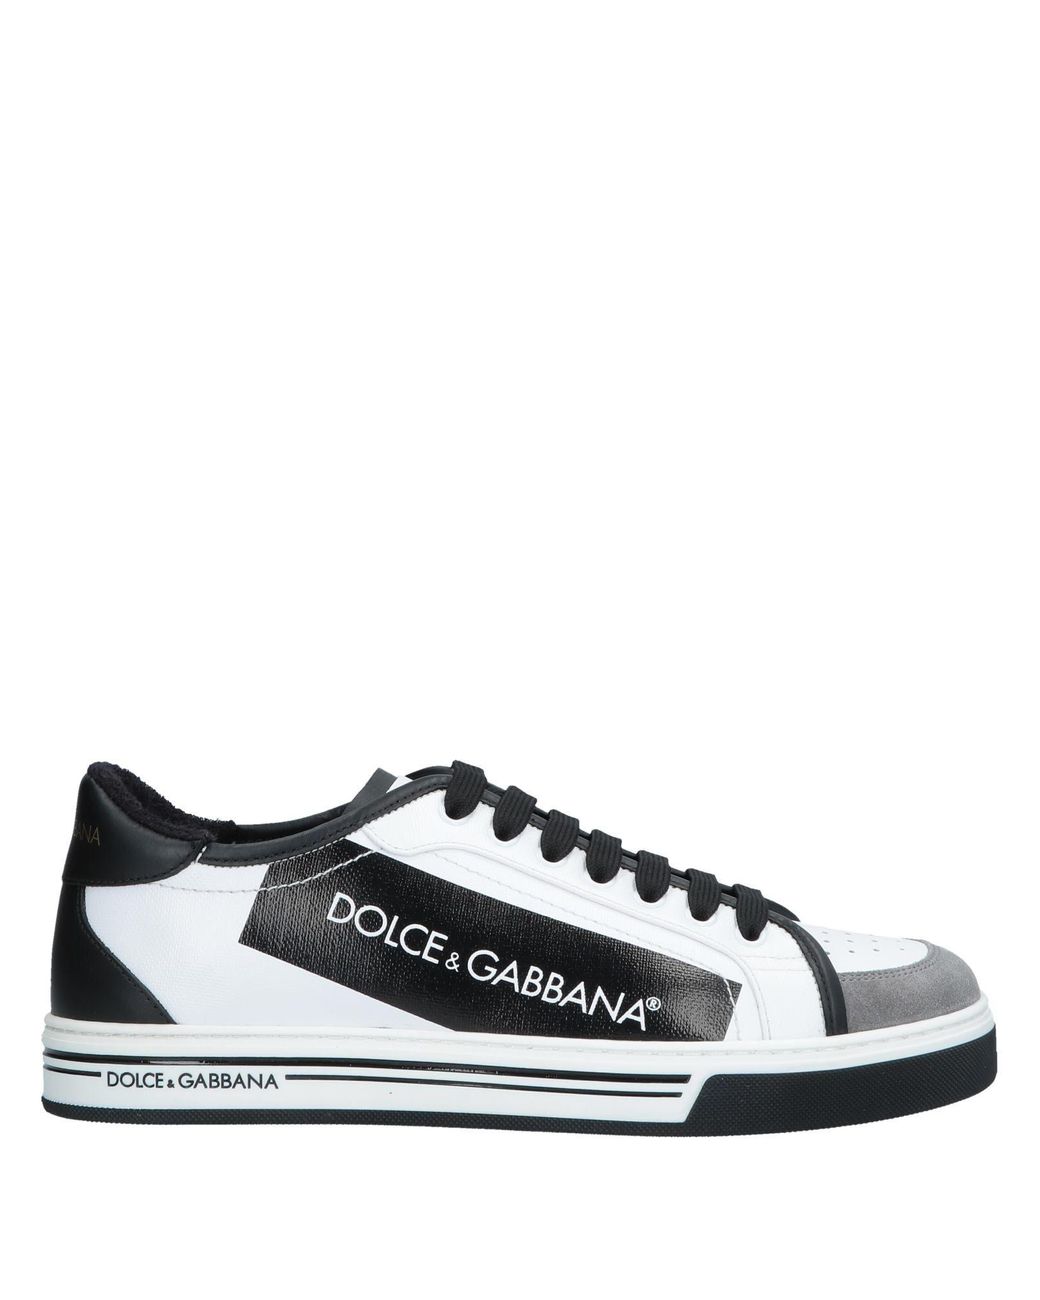 Dolce & Gabbana Suede Low-tops & Sneakers in White for Men - Lyst